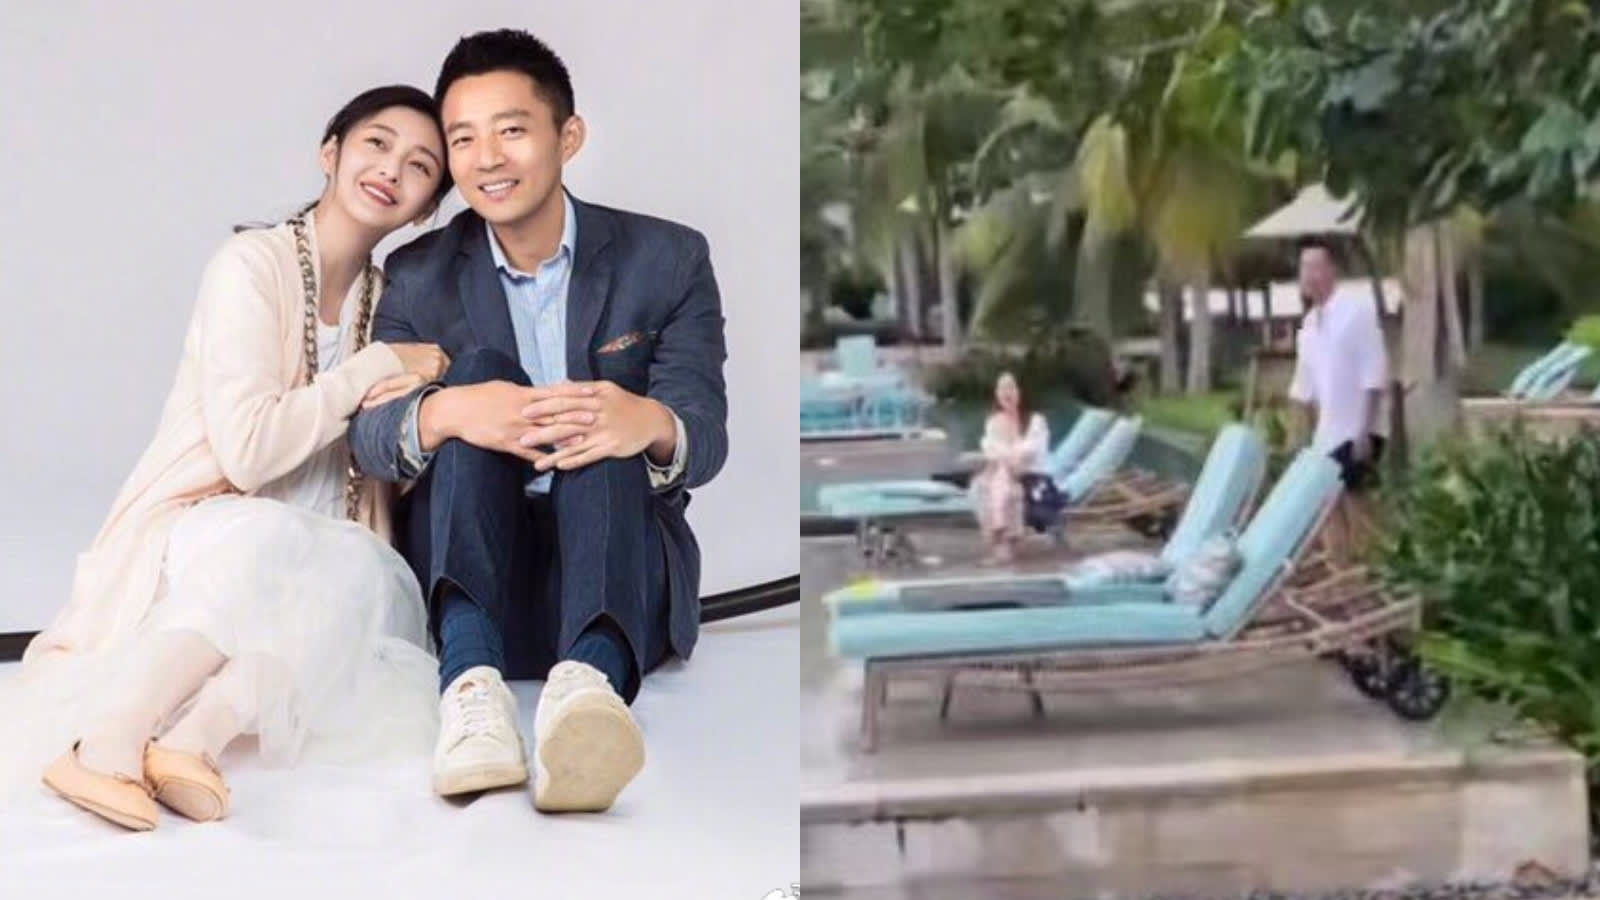 Xiaofei, who is rumoured to be seeing a “beautiful” and “wealthy” woman in her 20s, quickly turned around and left as soon as he realised they were being filmed.